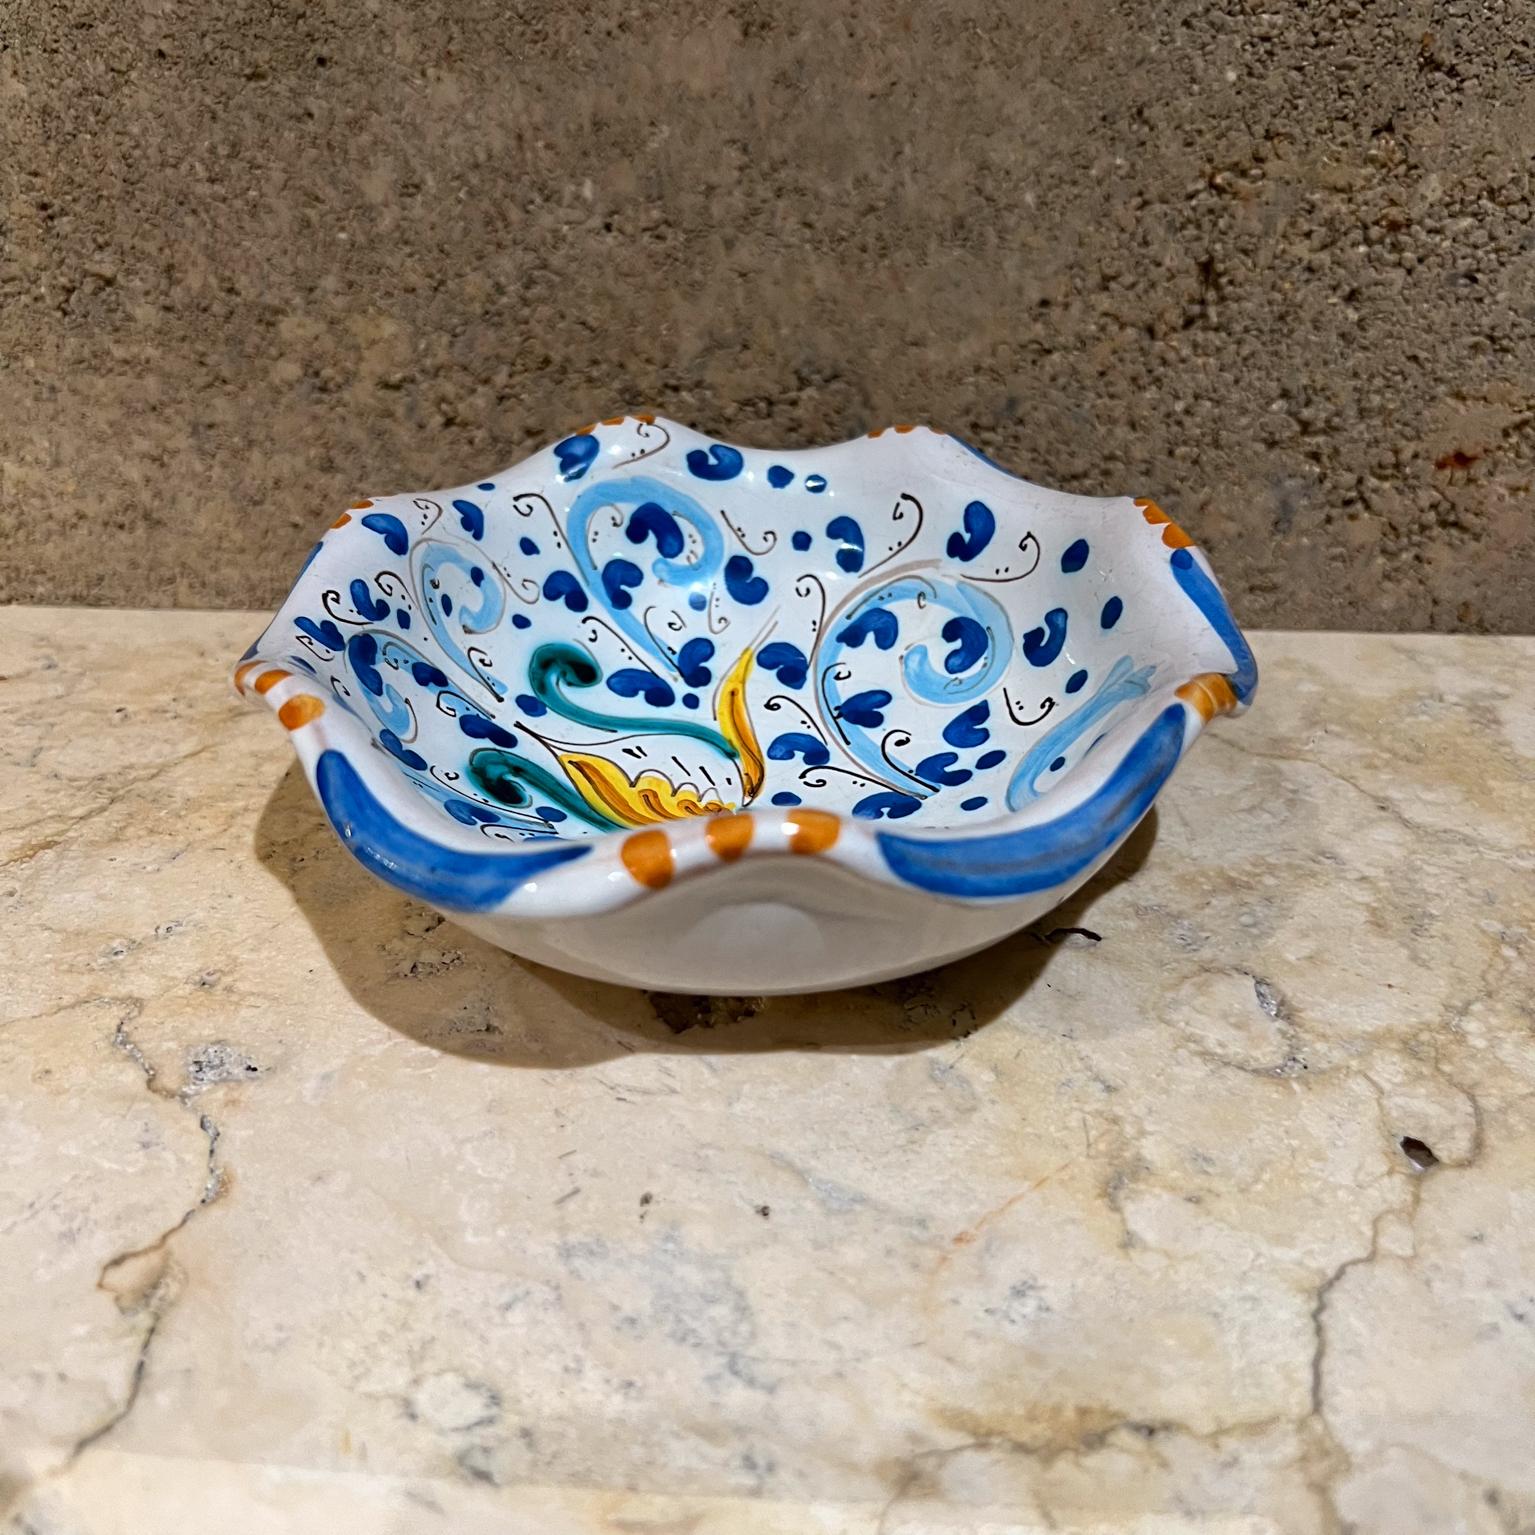 1960s Hand painted Dish Art Pottery Sicilian Bowl by Caltagirone Ceramics Italy
Signed 
2 h x 5.75 diameter
Preowned original vintage condition
Refer to images provided.